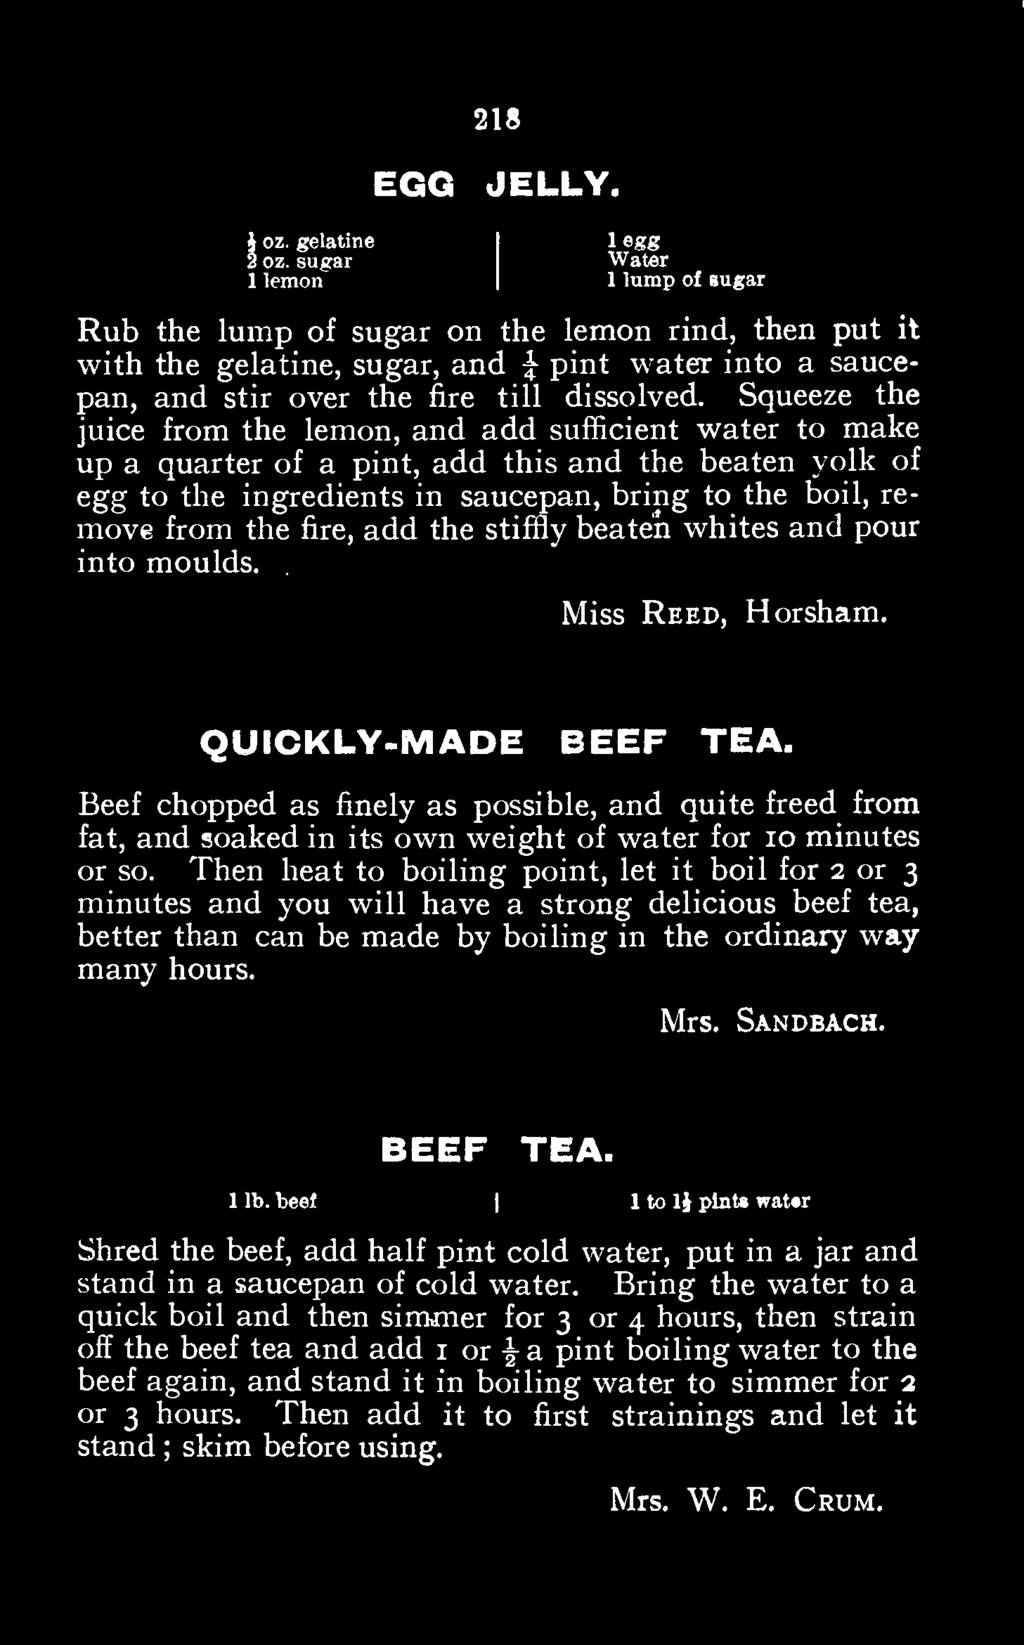 Then heat to boiling point, let it boil for 2 or 3 minutes and you will have a strong delicious beef tea, better than can be made by boiling in the ordinary way many hours. Mrs. Sandbach. BEEF TEA.